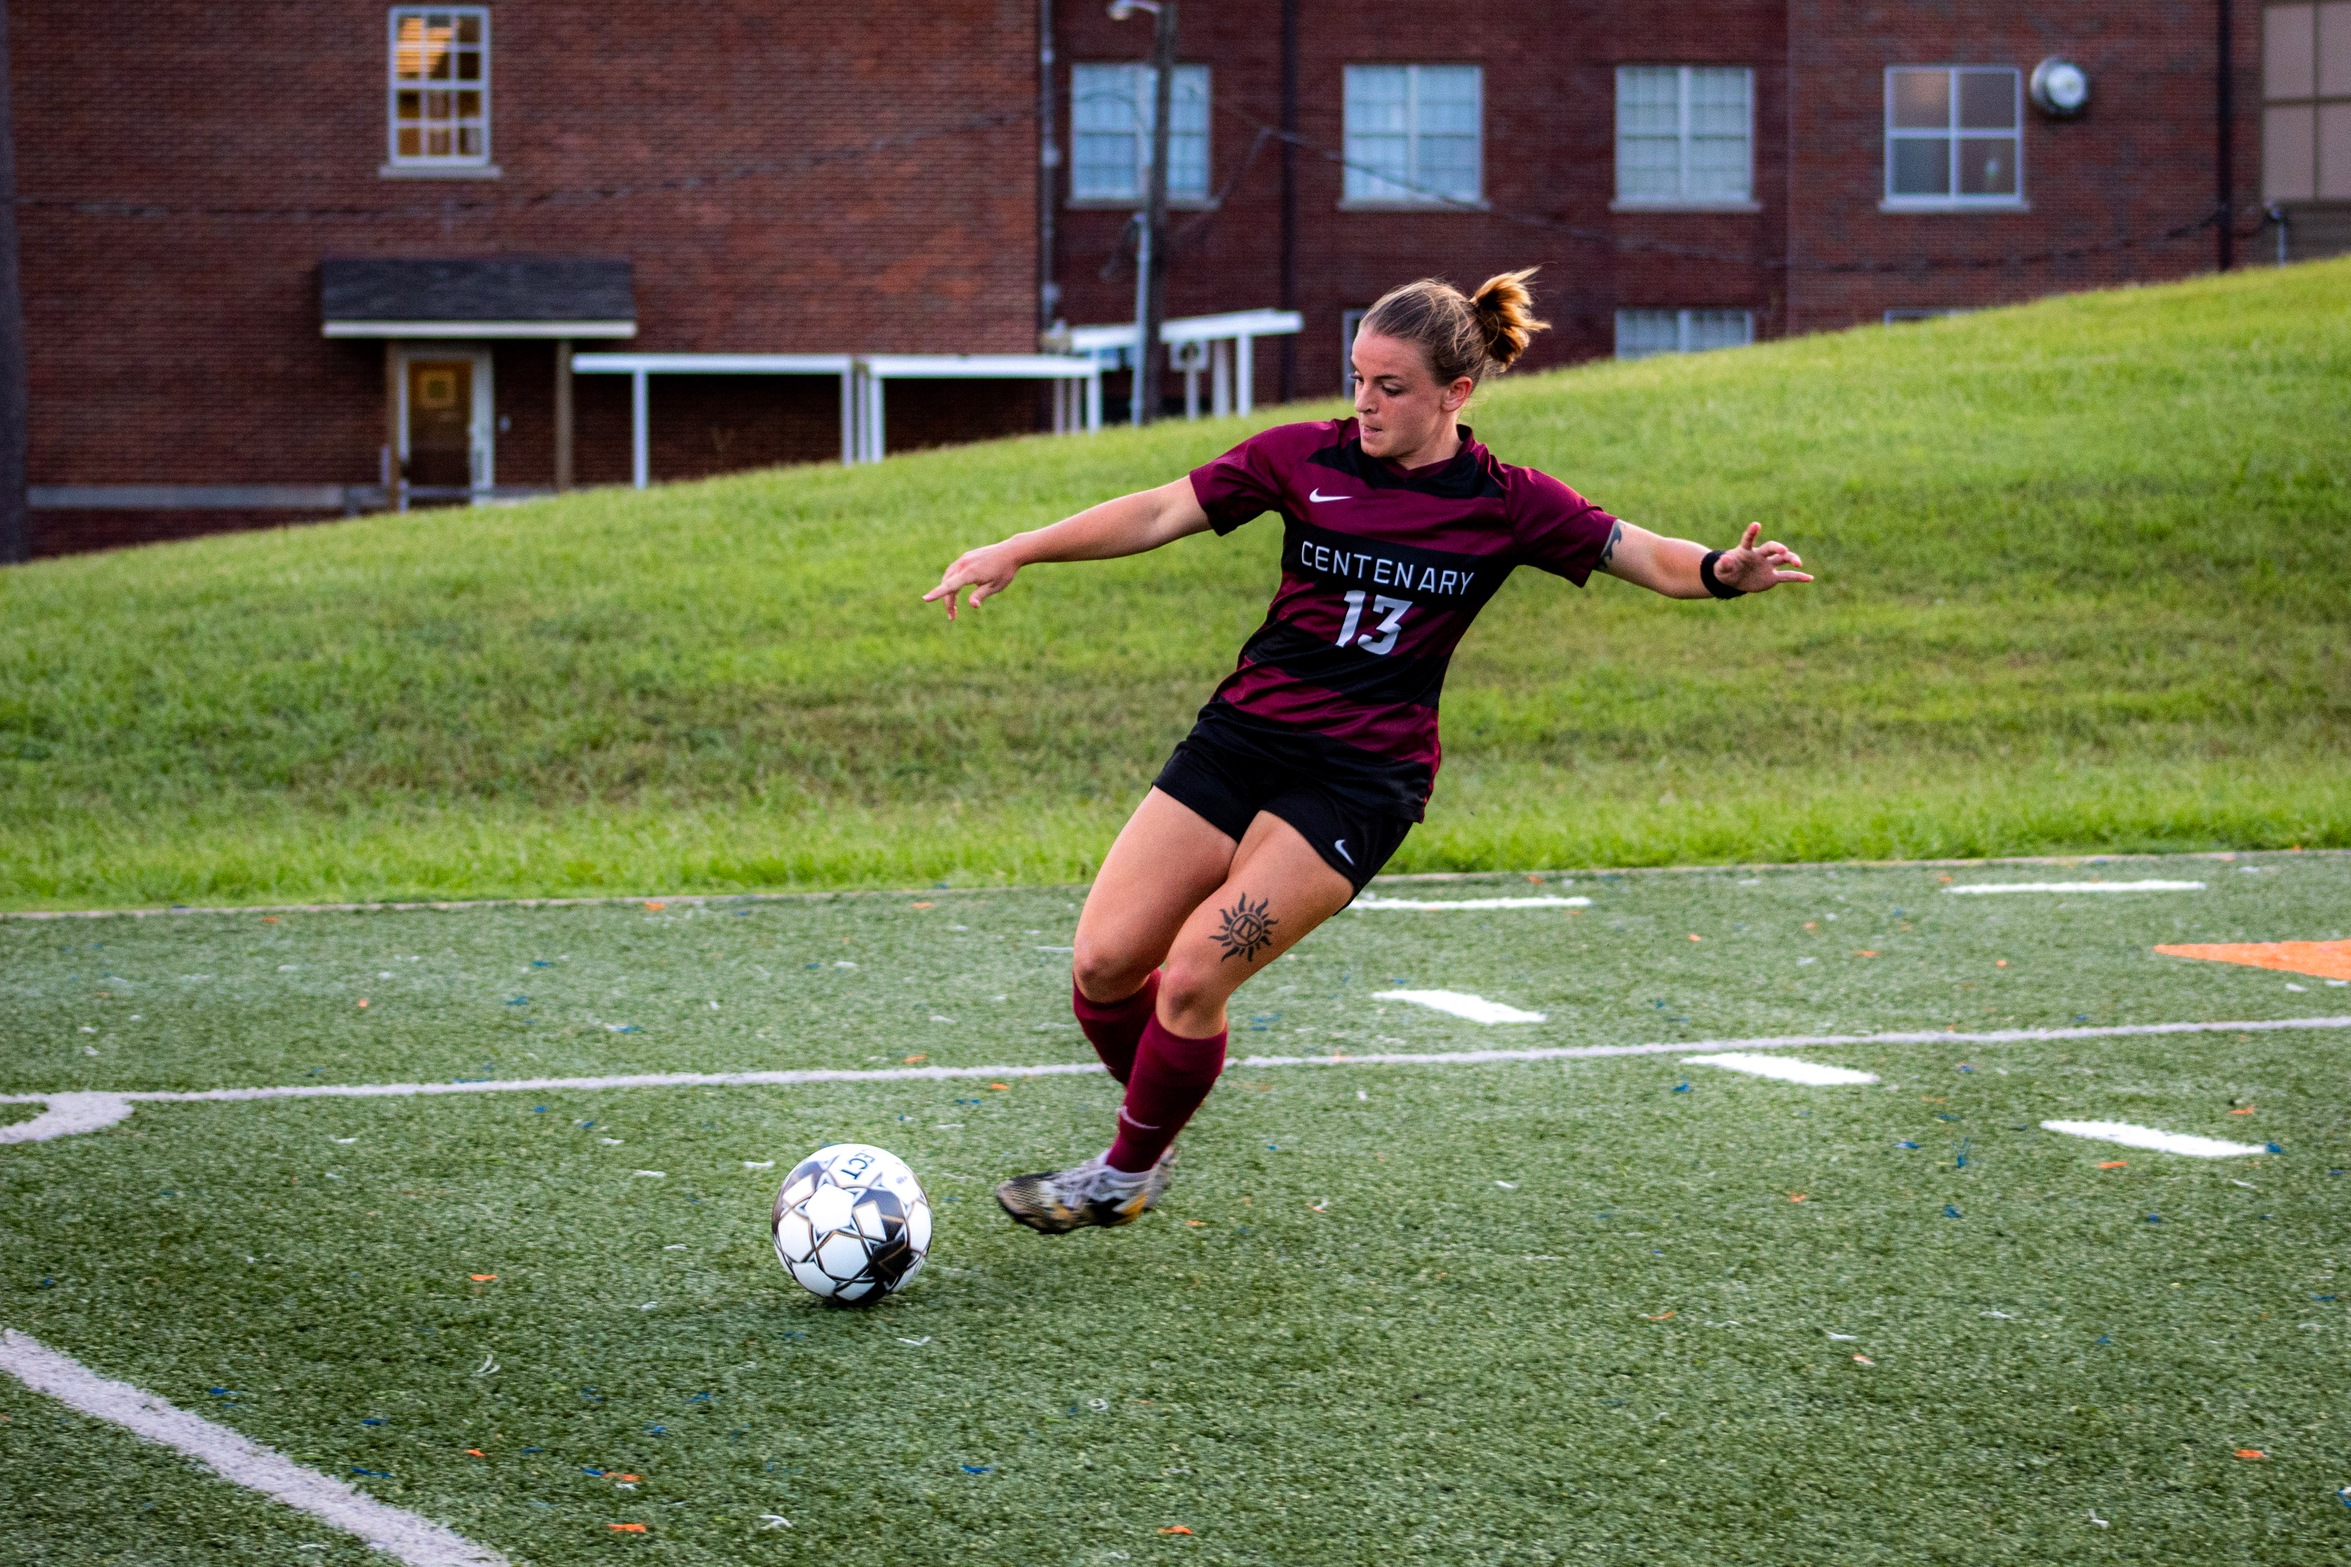 Ladies Blanked in Season Opener At Southern on Friday, 5-0